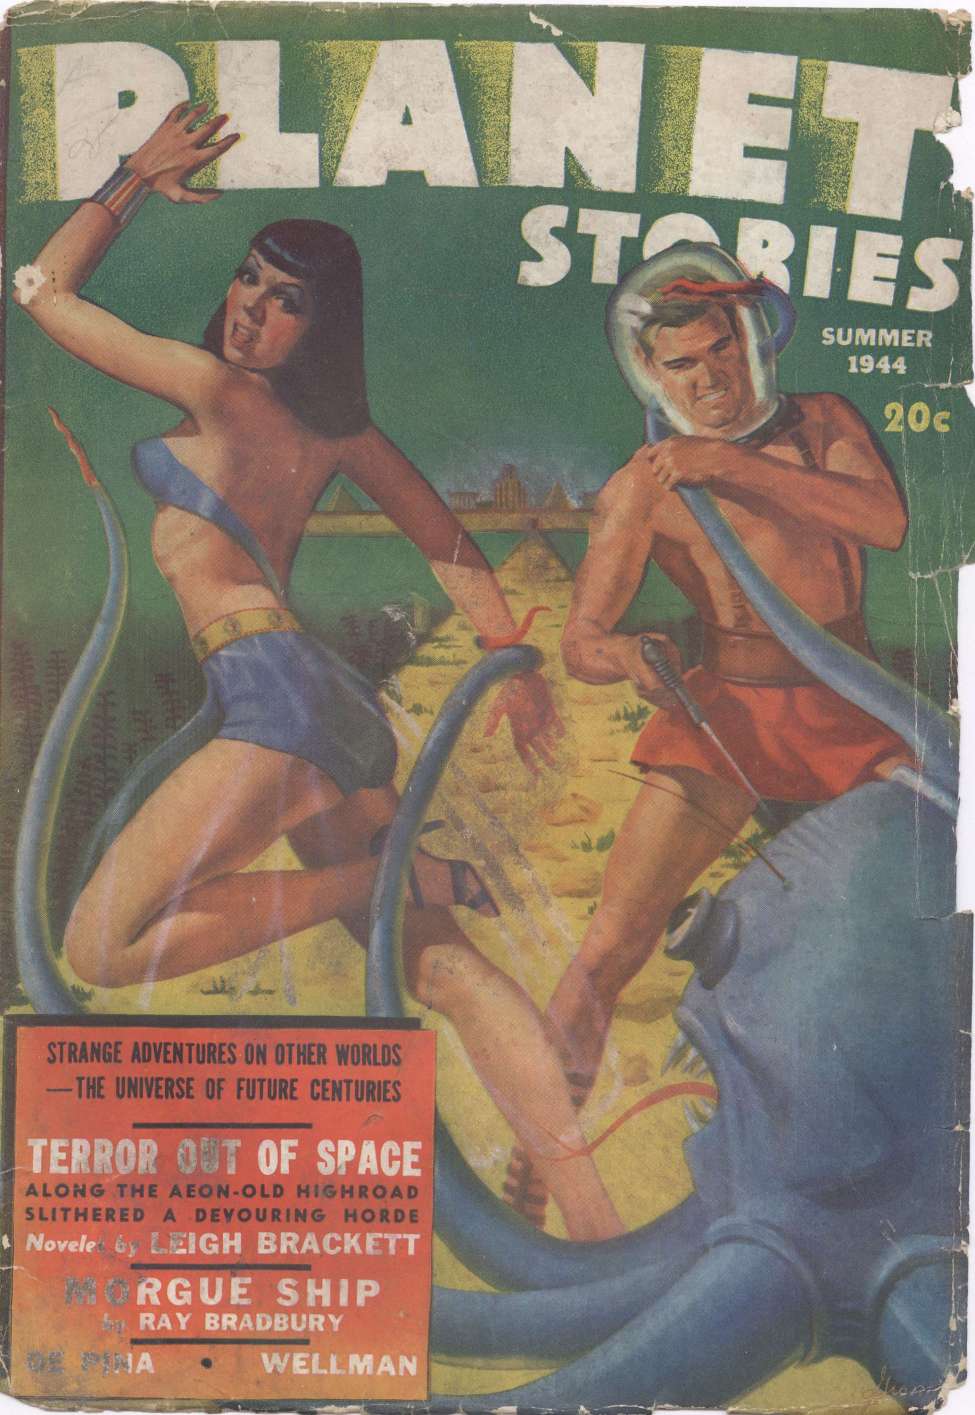 Comic Book Cover For Planet Stories v2 7 - Terror Out of Space - Leigh Brackett